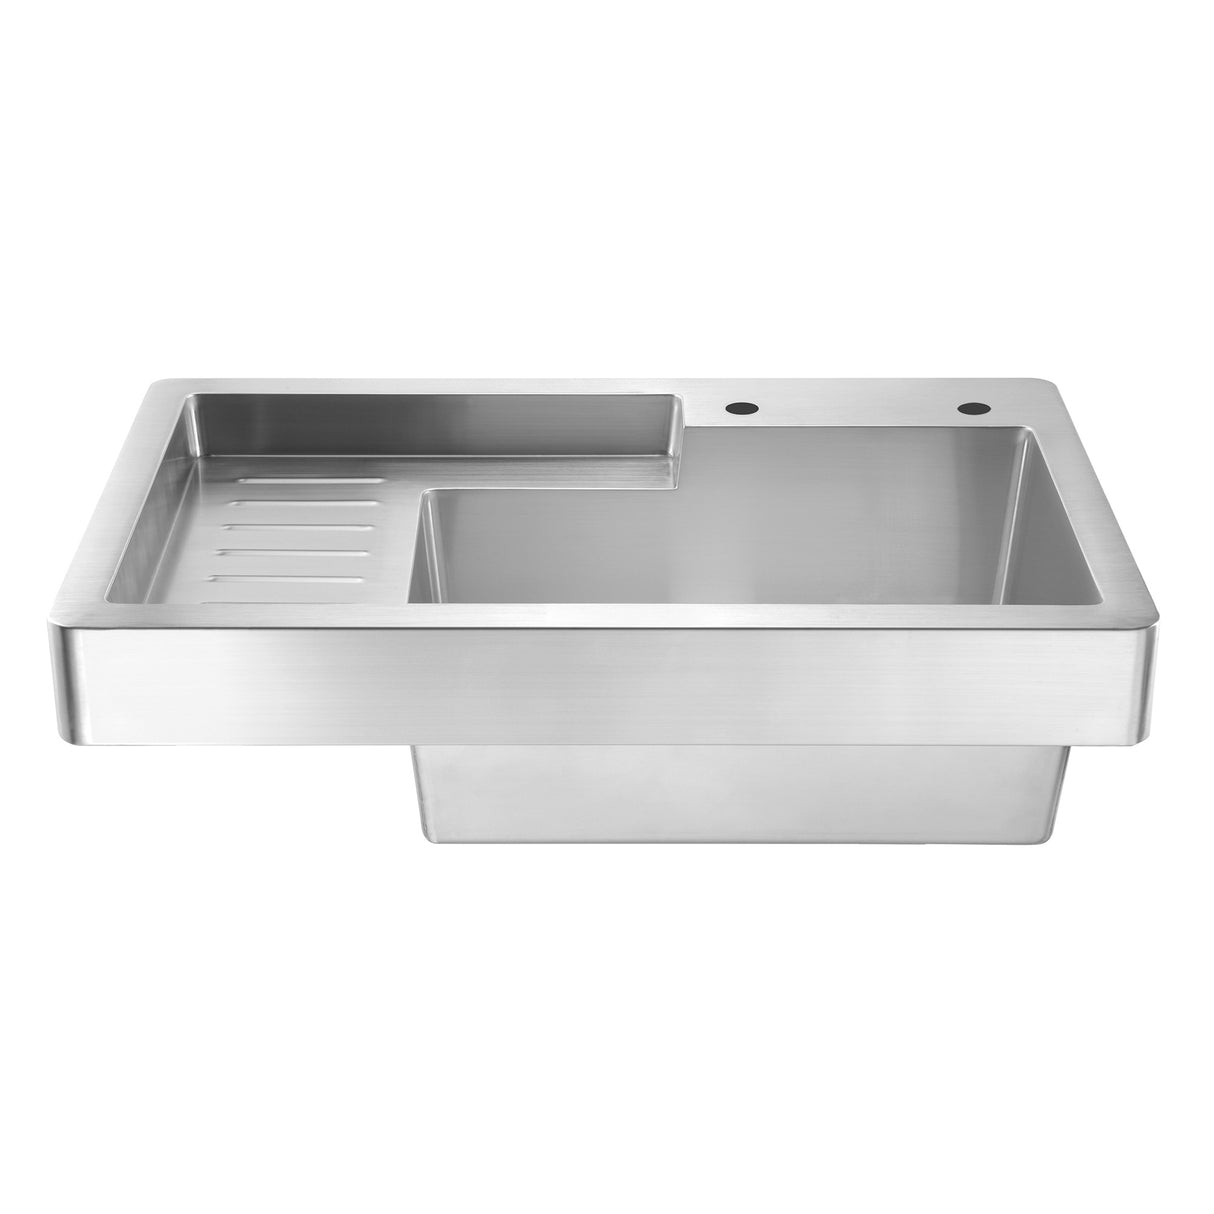 Pearlhaus Brushed Stainless Steel Single Bowl Drop in Utility Sink with Drainboard